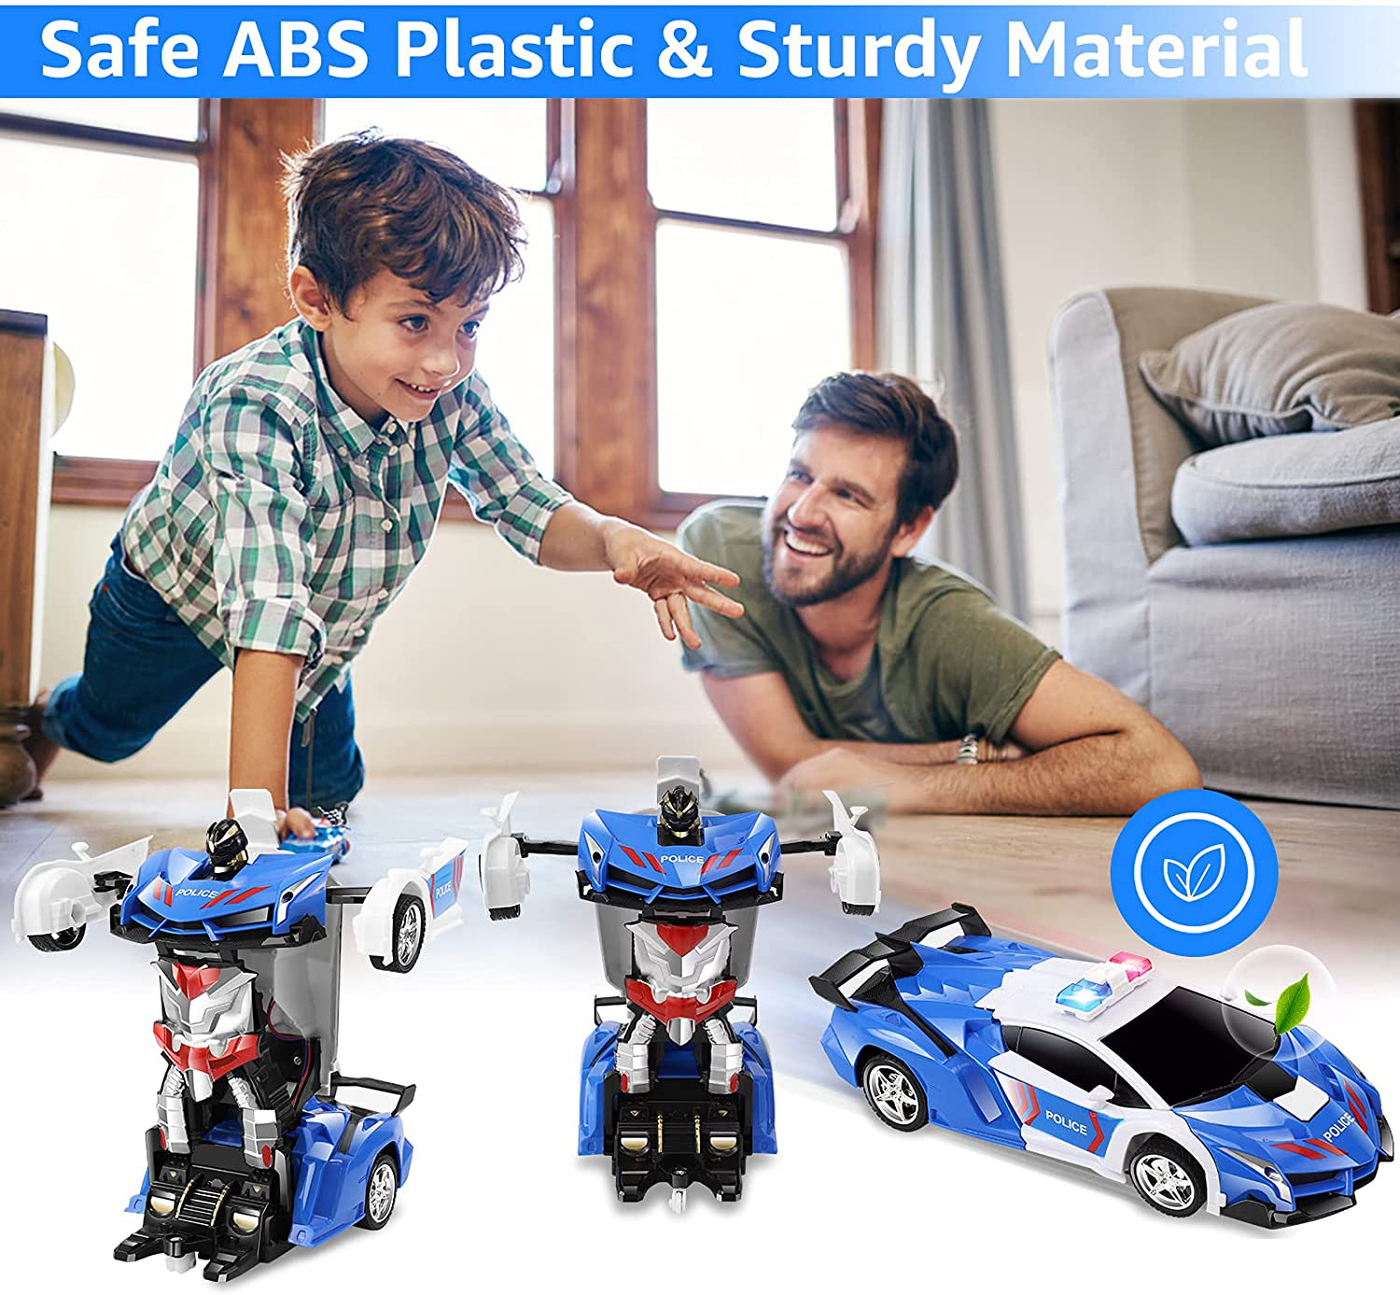 FAFUGANIA Remote Control Car, Transform Robot RC Car with One Button Deformation, 2.4Ghz 360 Degree Rotating Drifting Police Toy Cars, 1:18 Transforming Robot Boys Toys